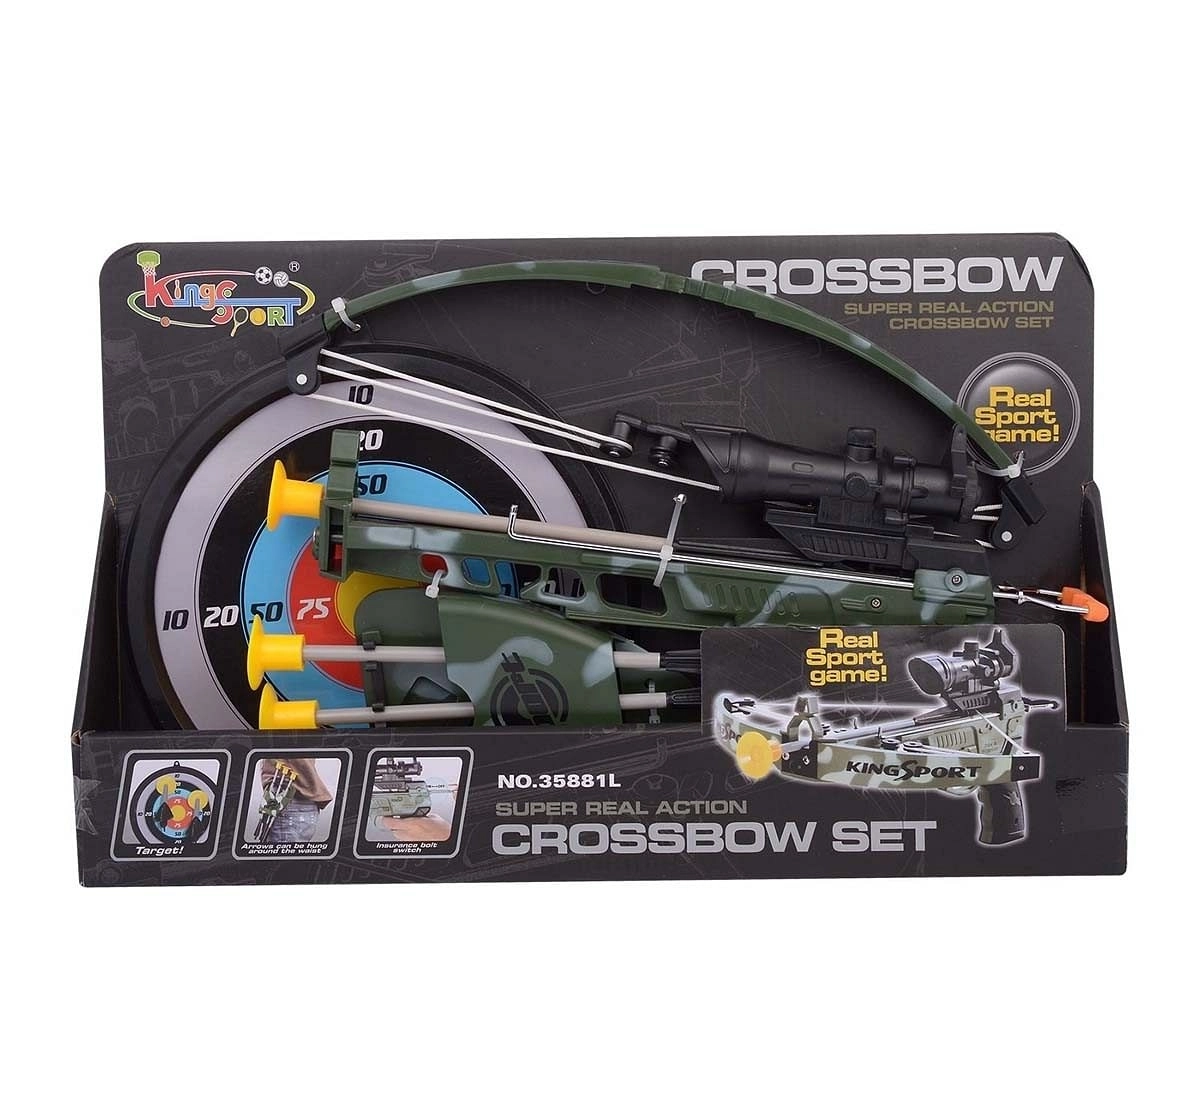 Comdaq Green Cross Bow Camoflage, Small Indoor Sports for Kids age 6Y+ 